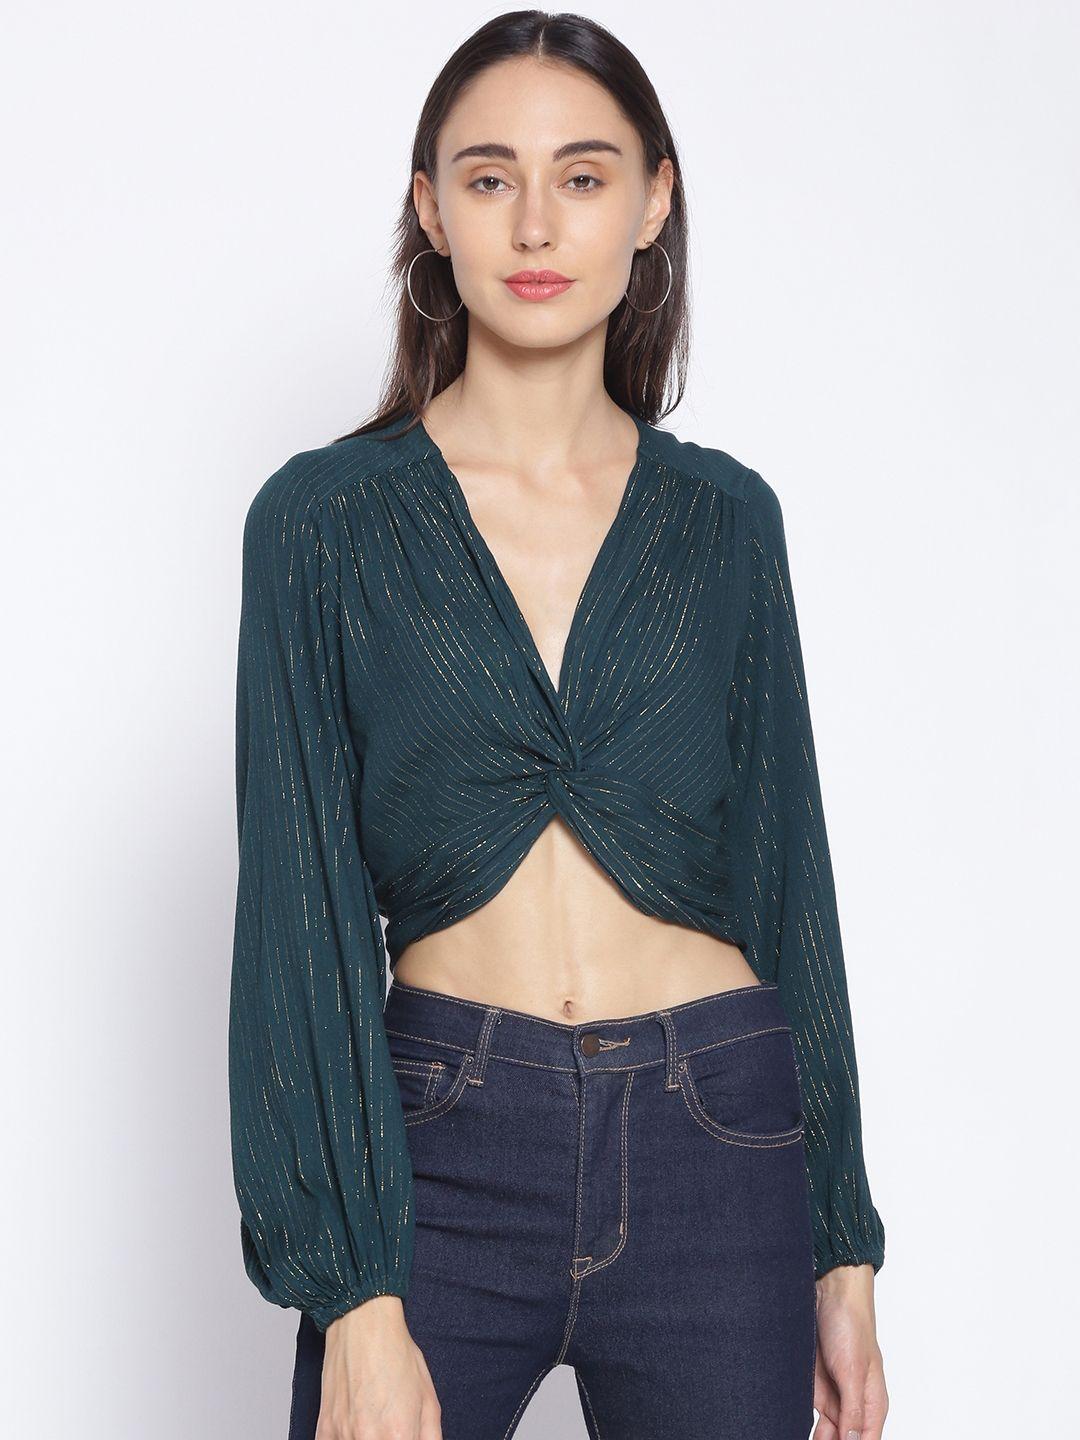 Oxolloxo Teal Green Striped Twist Knot Crop Top